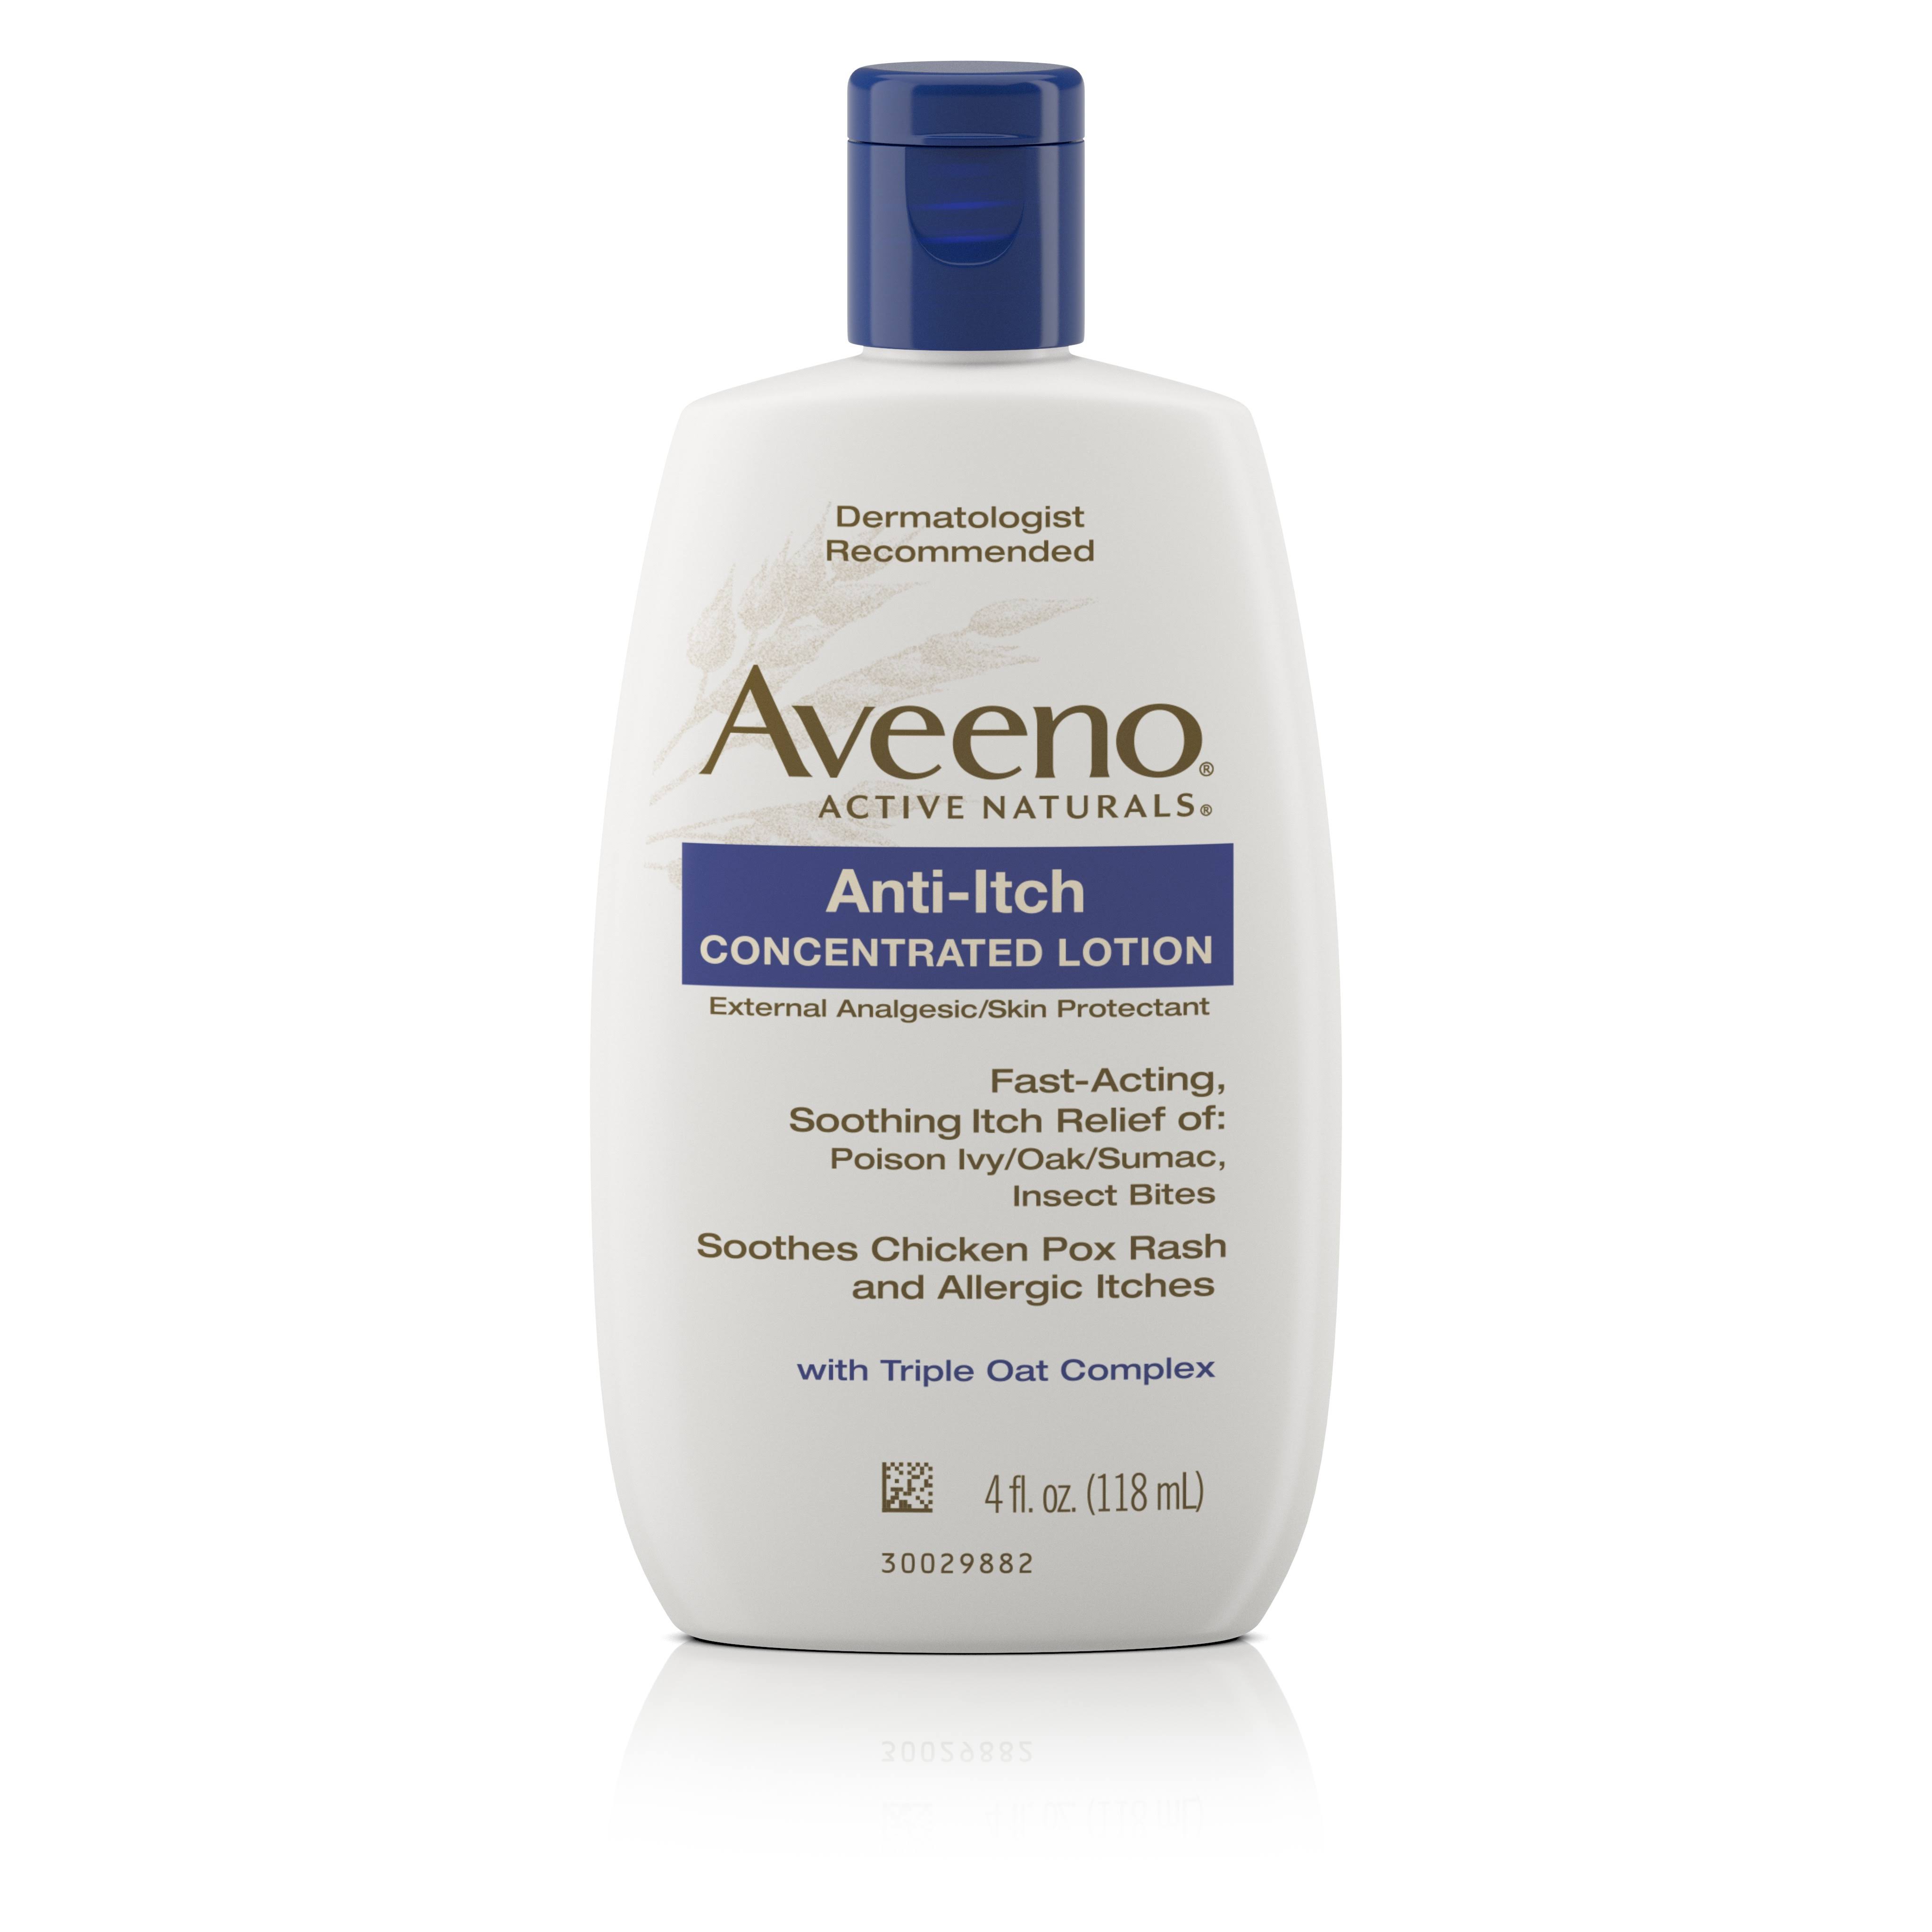 Aveeno Active Naturals Anti-Itch Concentrated Lotion - 4 oz